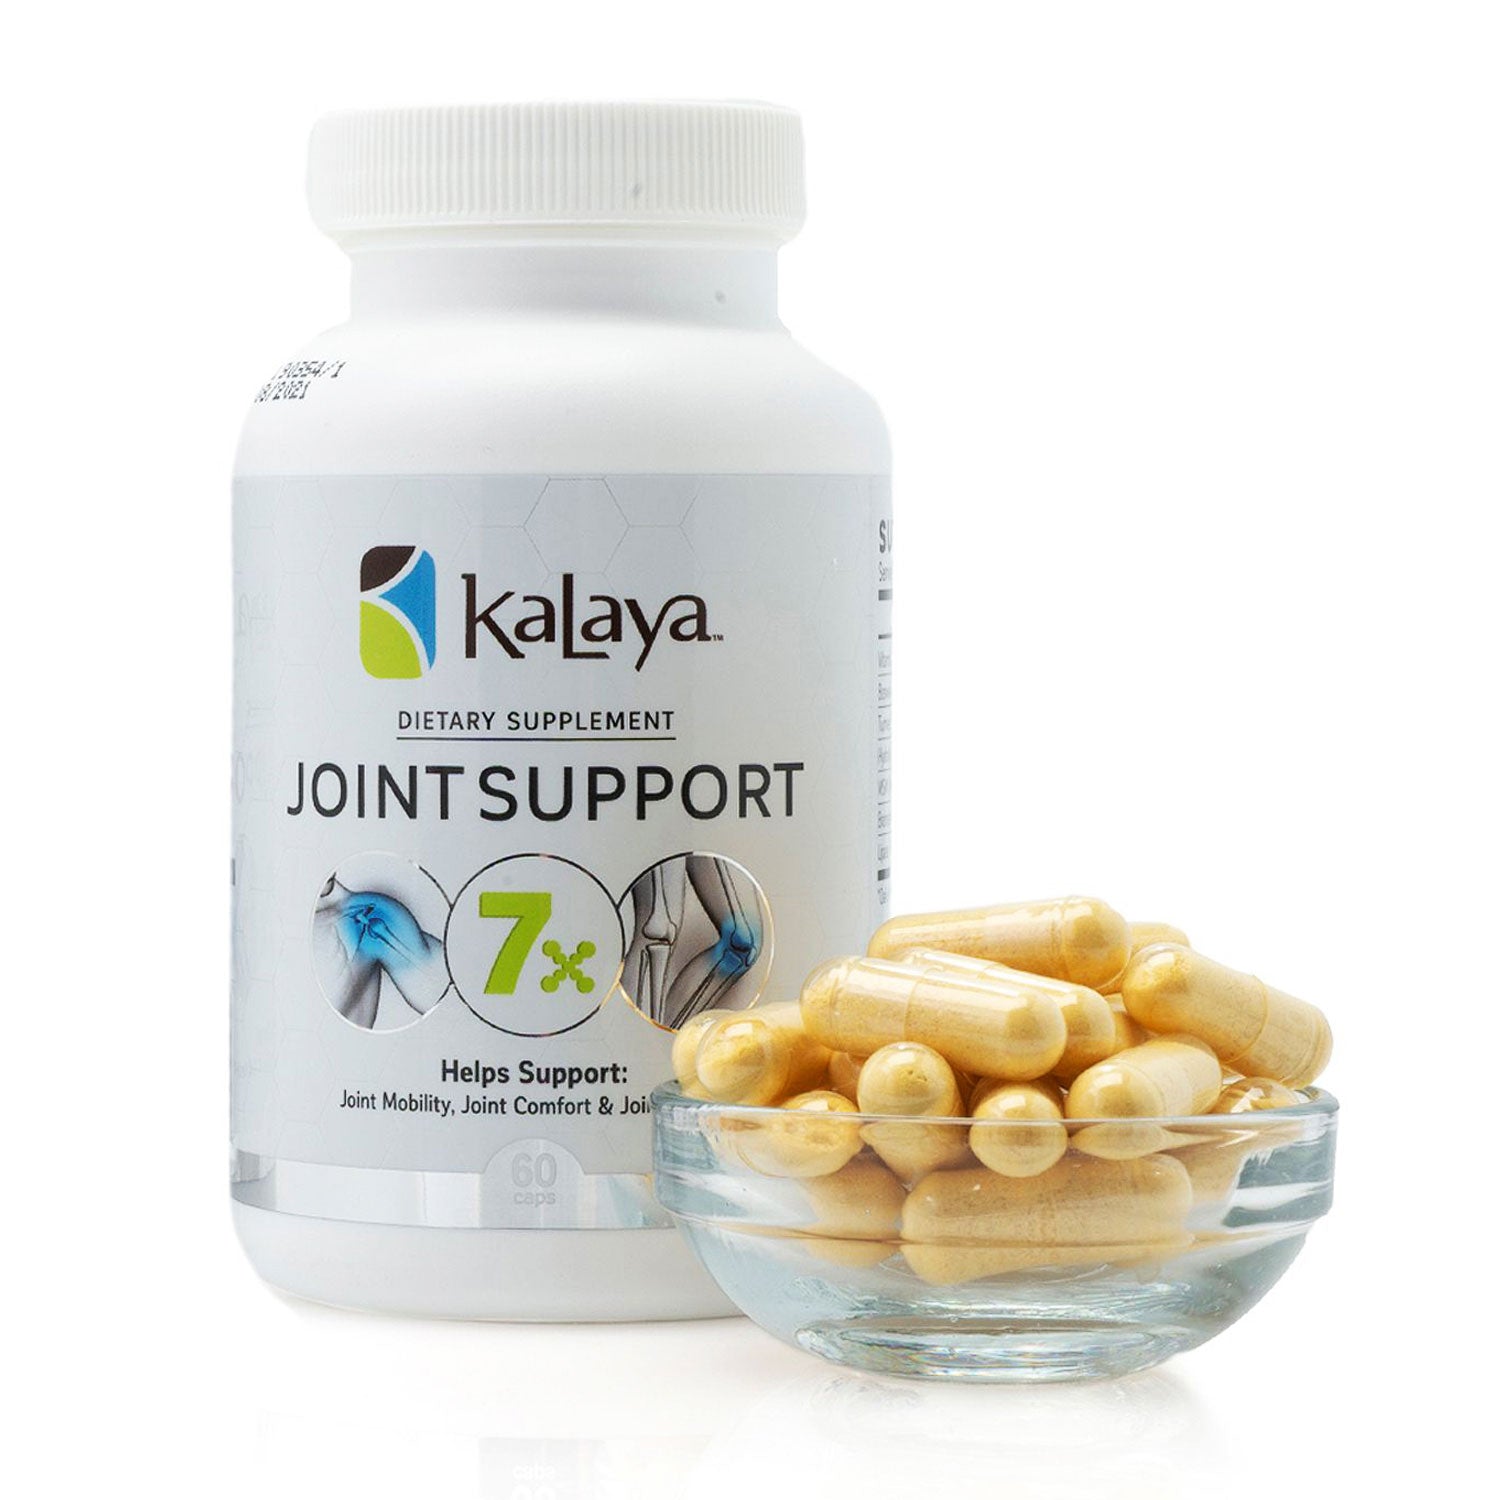 Bottle of Kalaya 7X Joint Support Dietary Supplement to Help Support Joint Mobility, Comfort and Health with 60 Capsules shown in small bowl